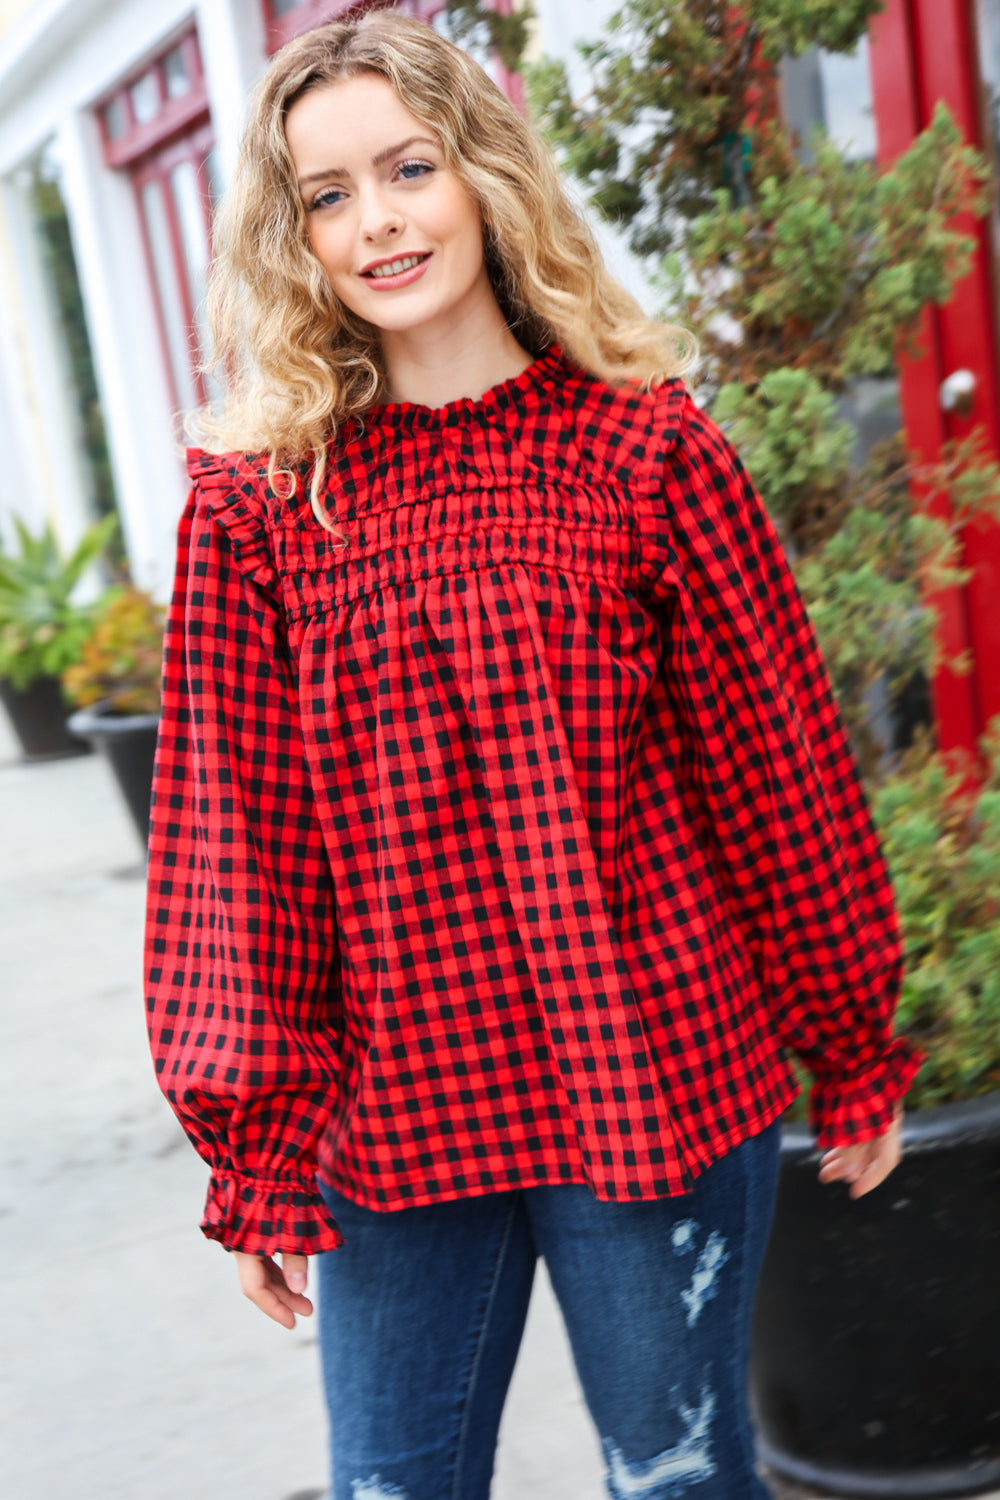 Adorable in Red Gingham Shirred Mock Neck Top - Sybaritic Bags & Clothing